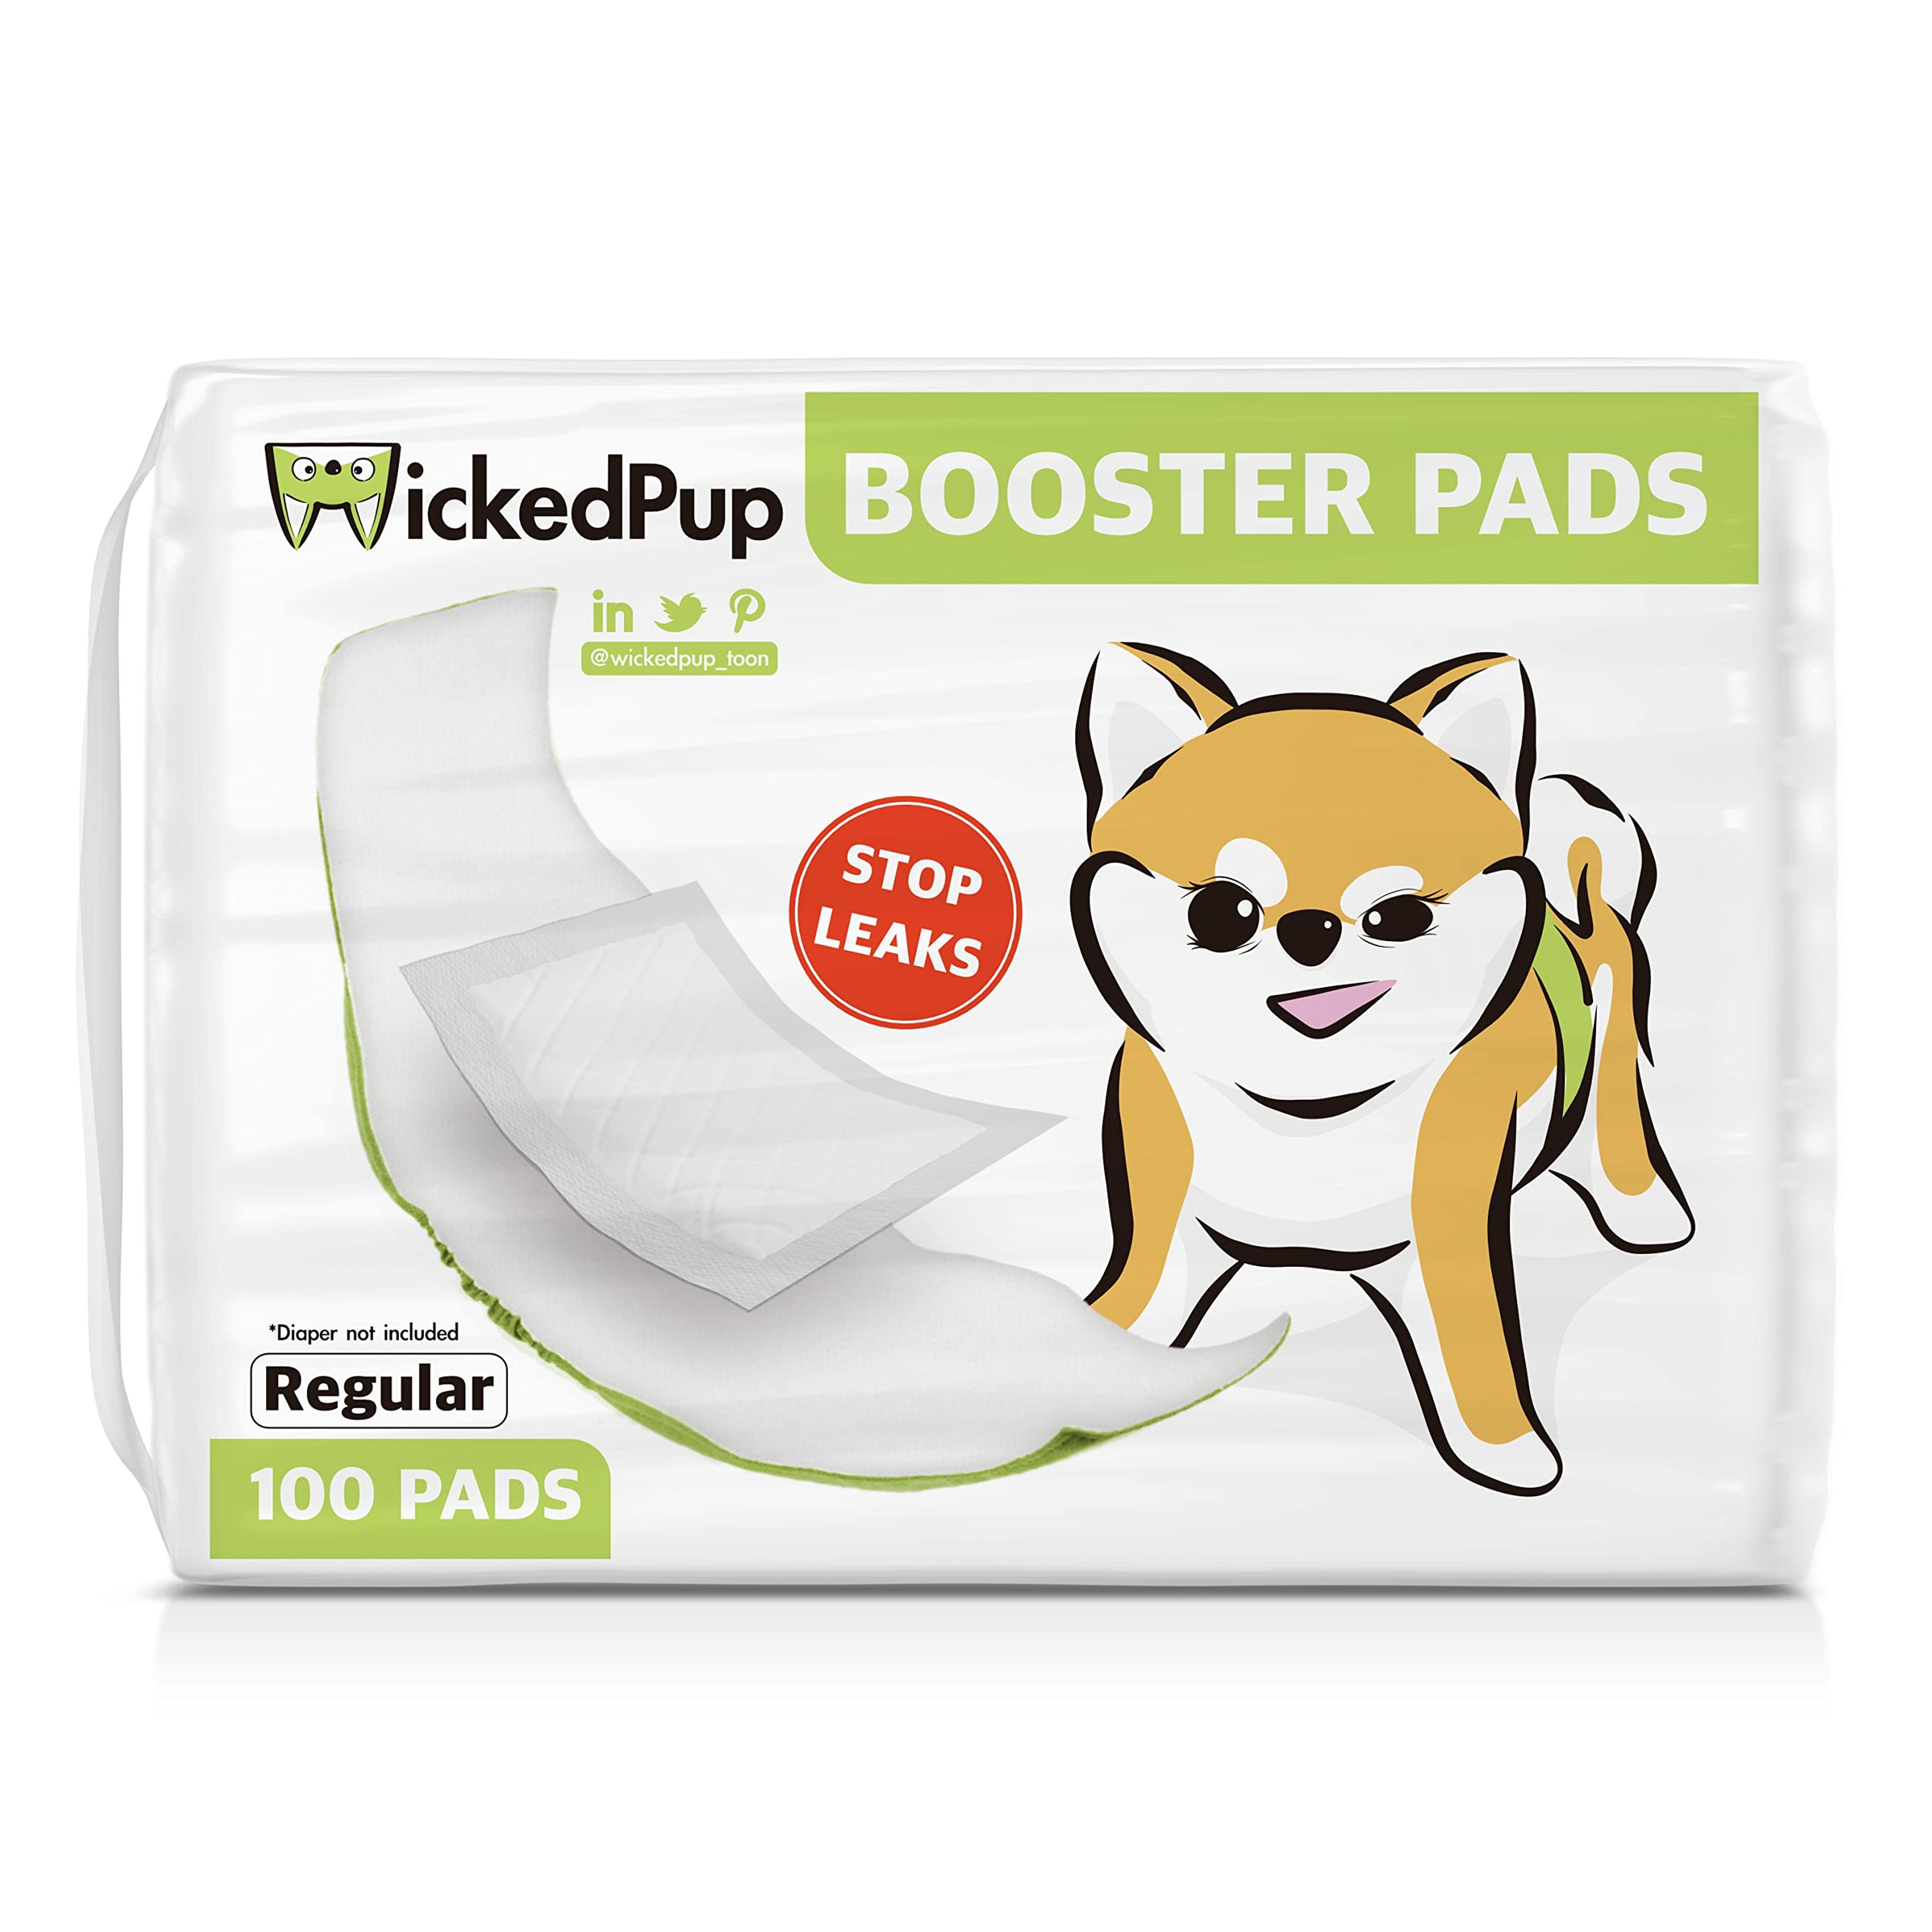 WICKEDPUP Dog Diaper Liners Booster Pads for Male and Female Dogs, 100ct | Disposable Doggie Diaper Inserts fit Most Reusable Pet Belly Bands, Cover Wraps, and Washable Period Panties Regular (100 Count)